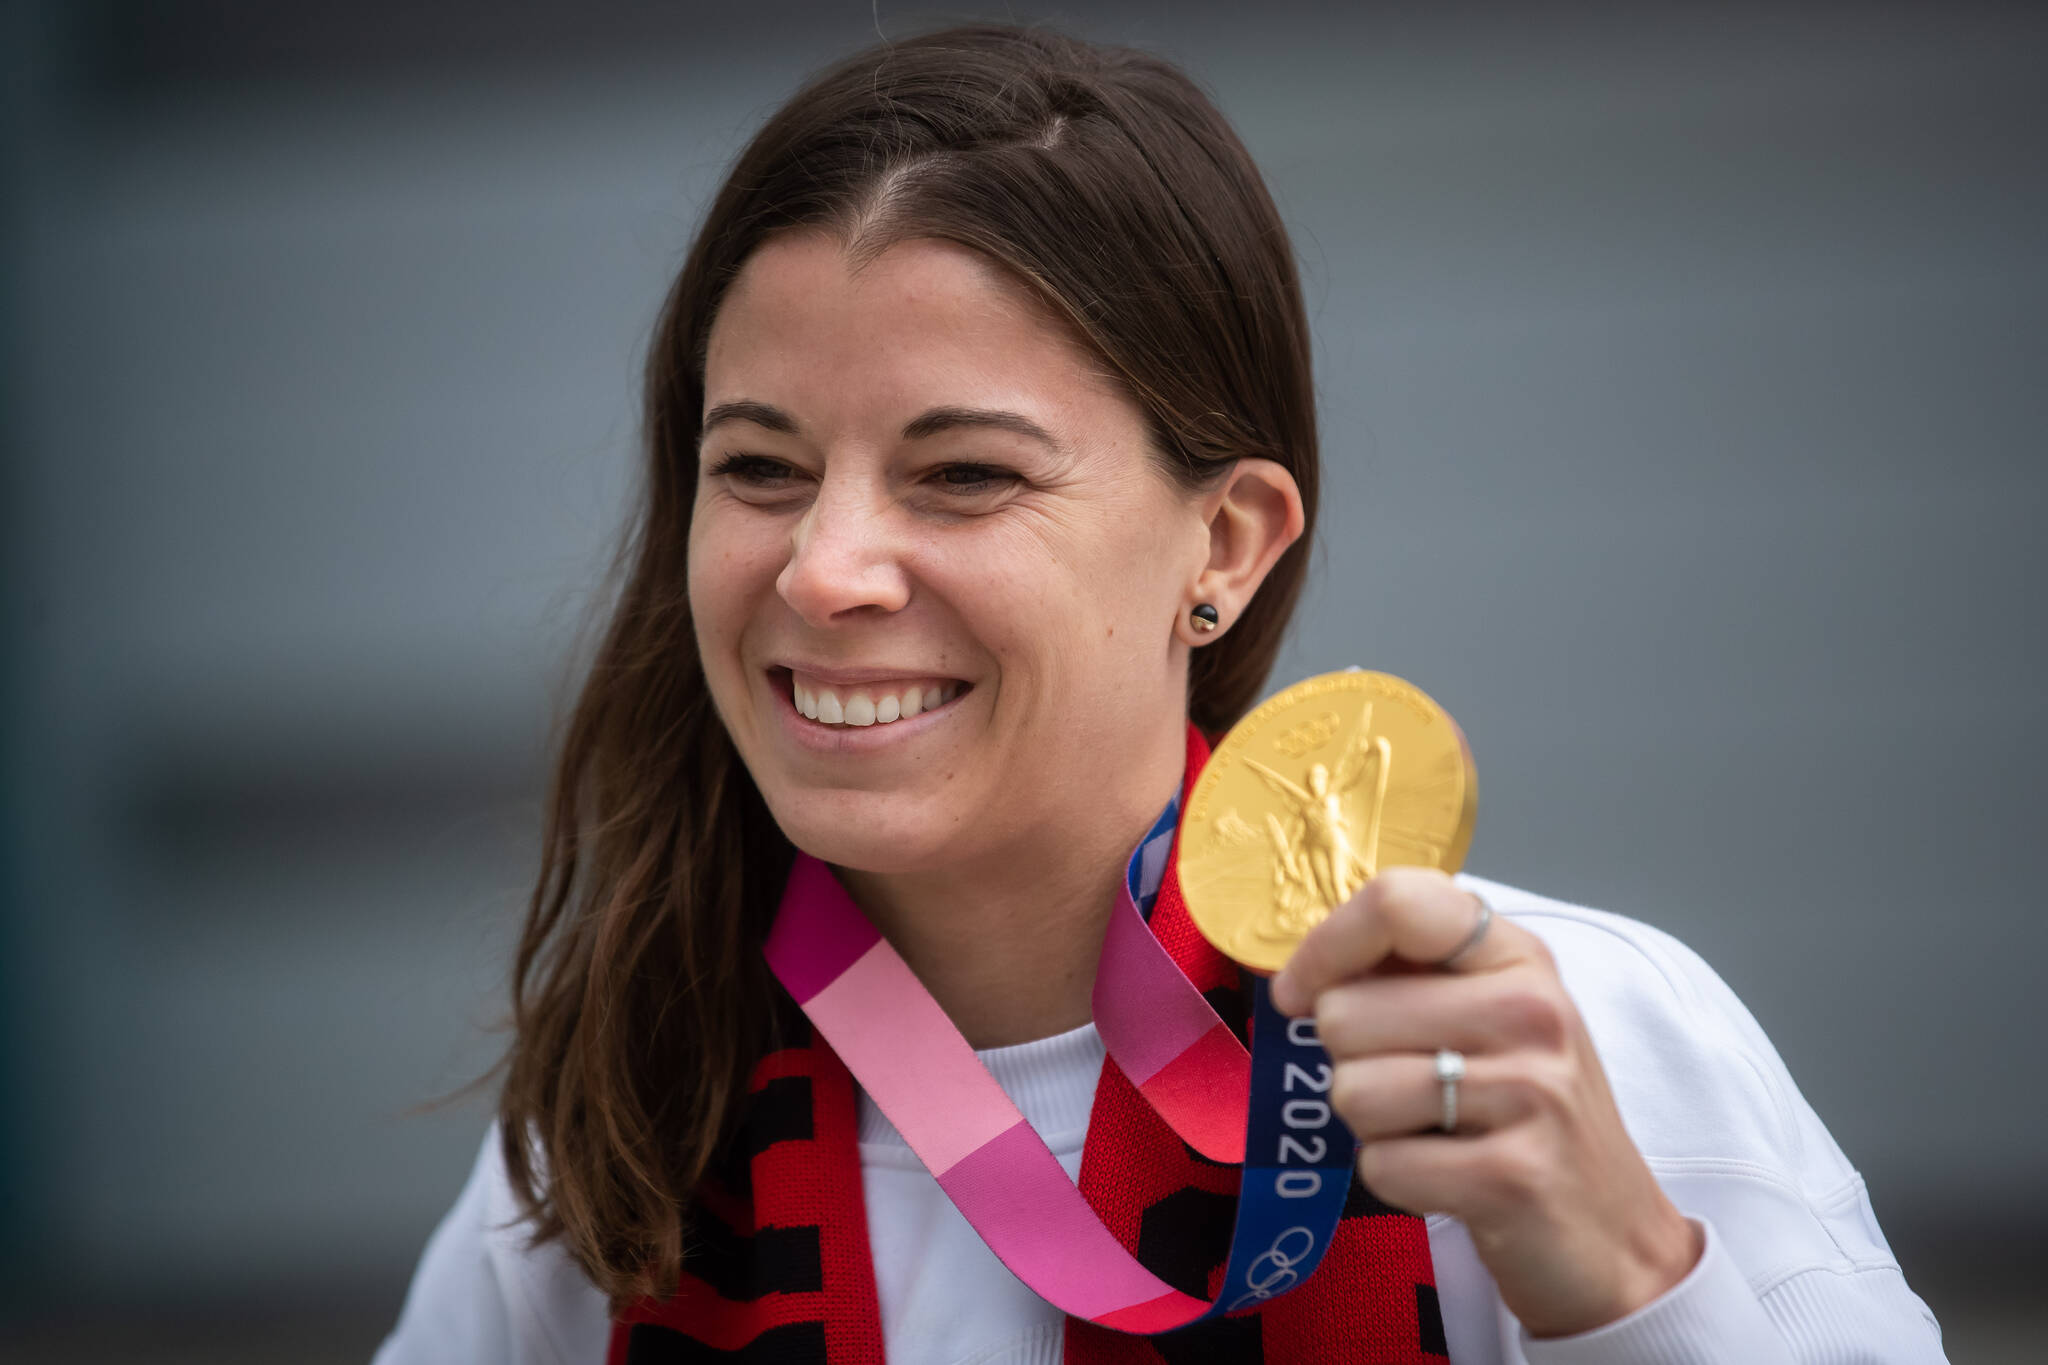 Canada women's national soccer team goalkeeper Stephanie Labbe poses for photographs with her gold medal from the Tokyo Olympics after an announcement in Vancouver, on Wednesday, March 16, 2022. Soccer Canada announced that the women's team will play Nigeria on April 8 in Vancouver and on April 11 in Langford, B.C. THE CANADIAN PRESS/Darryl Dyck